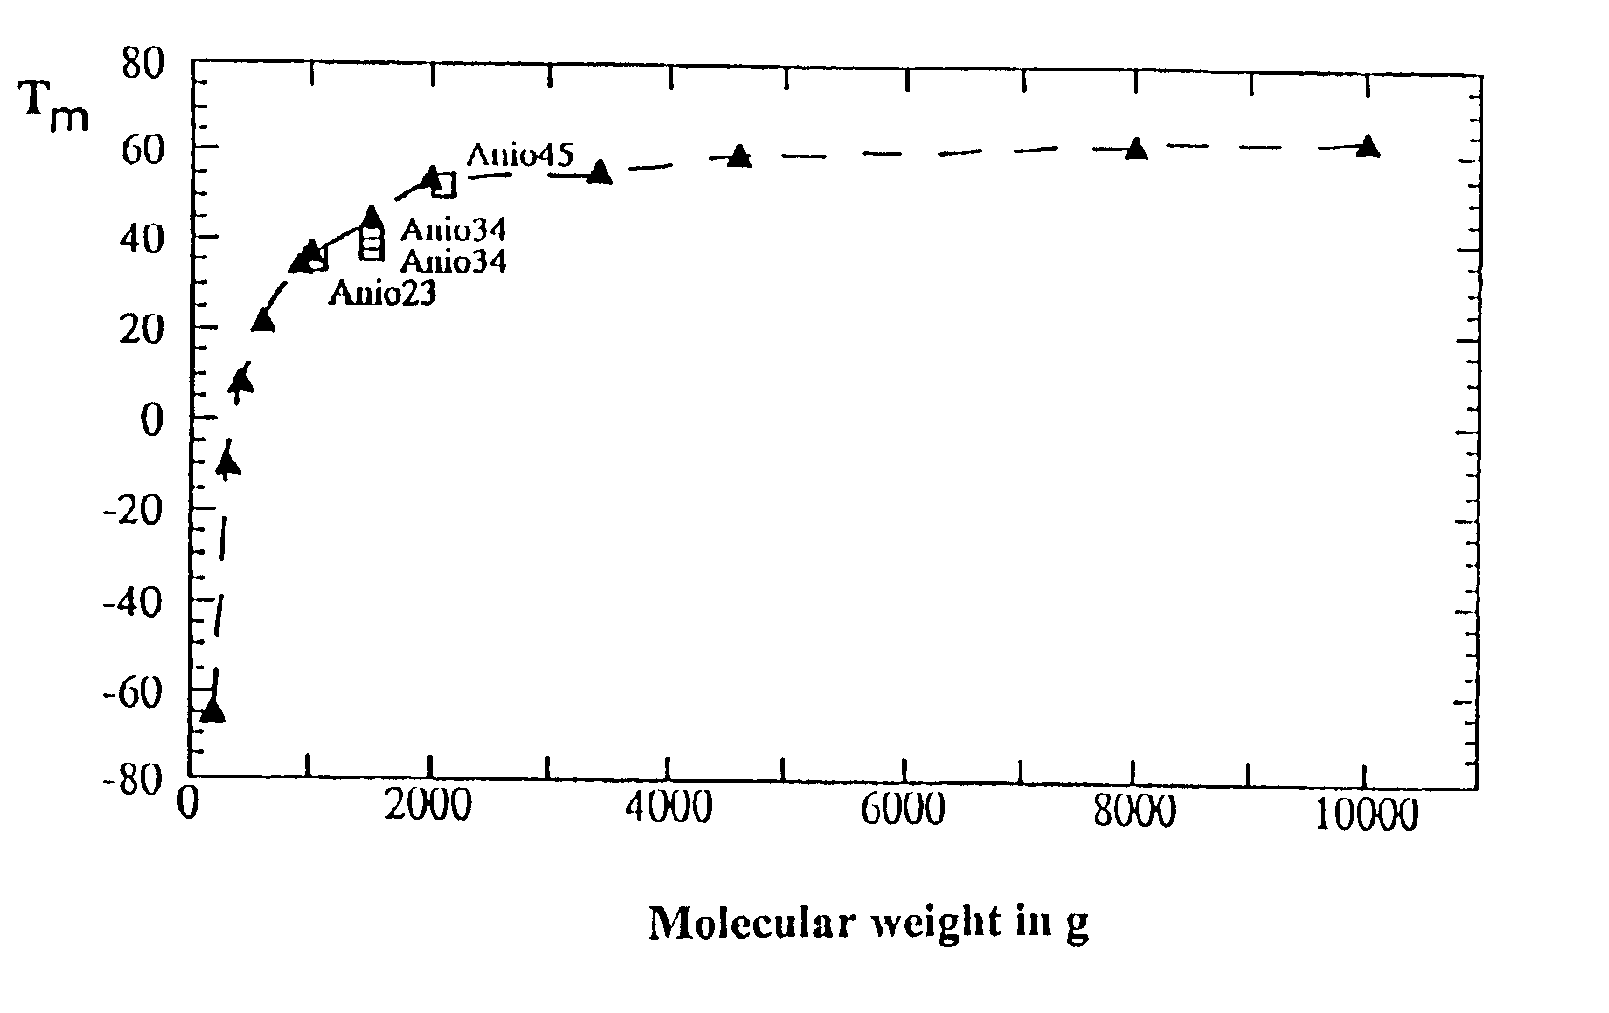 Copolymer of ethylene oxide and at least one substituted oxirane carrying a cross-linkable function, process for preparation thereof, and use thereof for producing ionically conductive materials